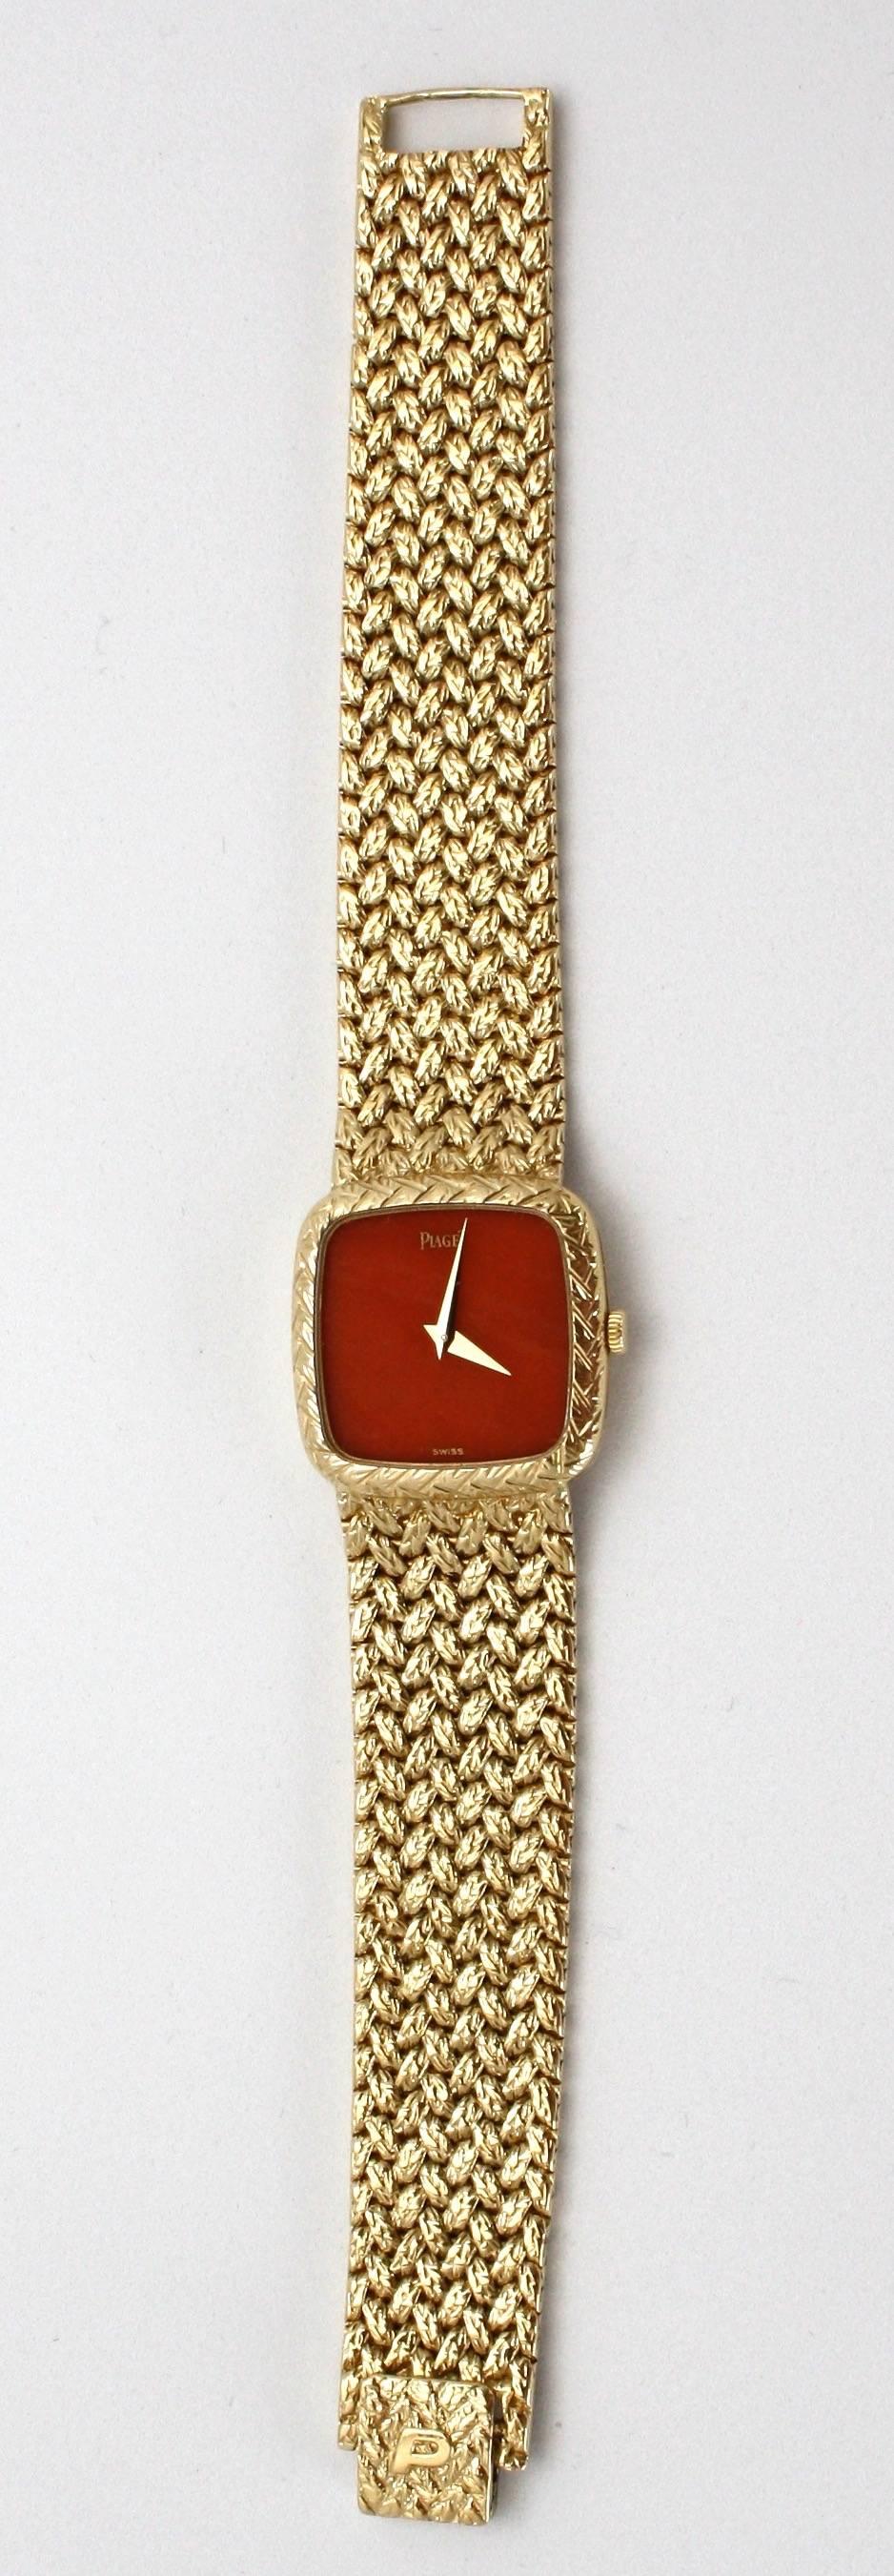 This amazing Piaget Ladies Yellow Gold Coral Faced watch is for collectors.  It is a Piaget with a Coral Face and woven bracelet band. This is very rare and highly collectible.  Coral has been endangered for a long time now (over 20 years),  so